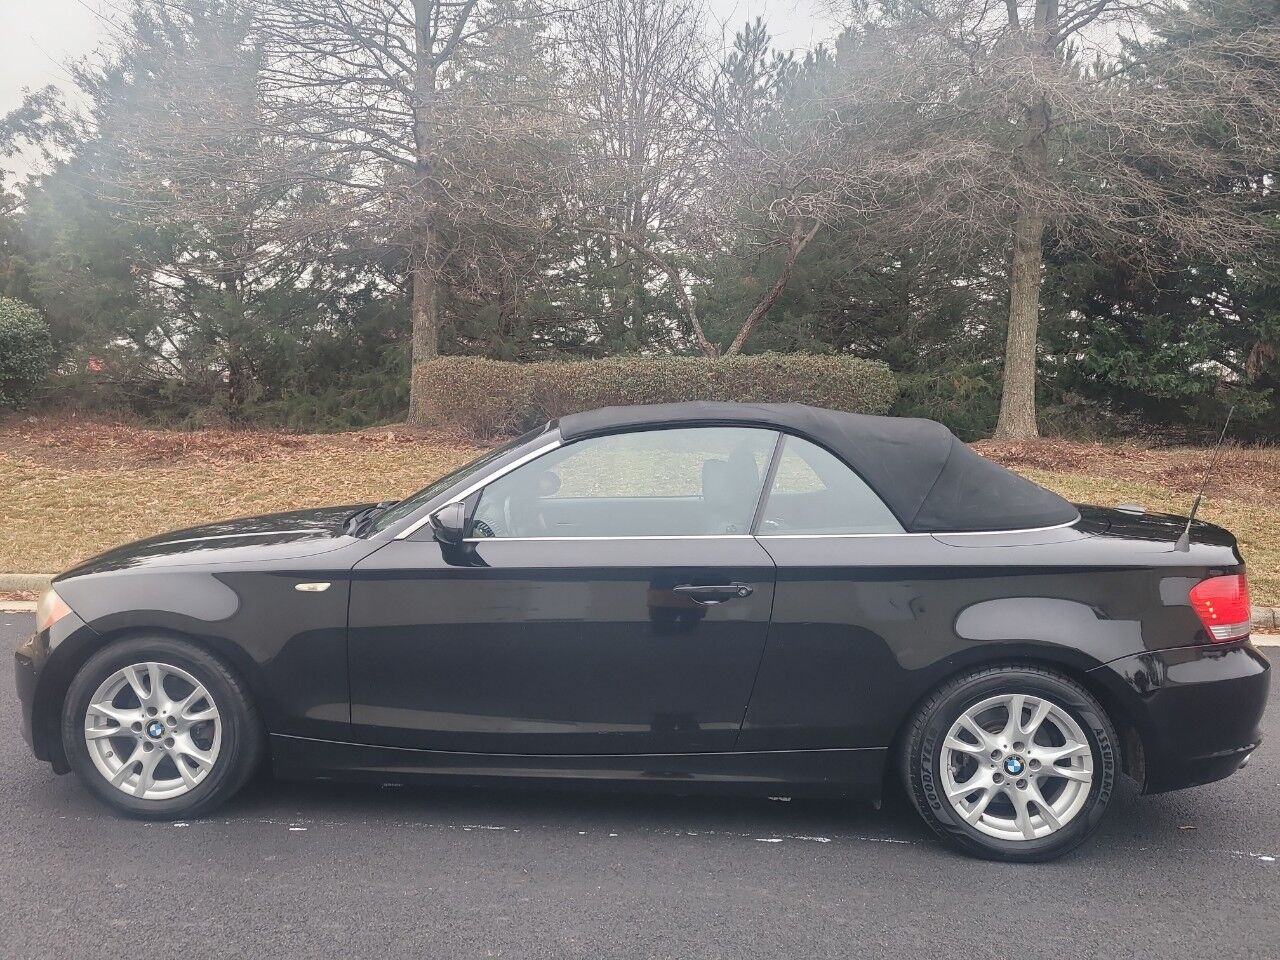 2008 BMW 1 Series For Sale - Carsforsale.com®